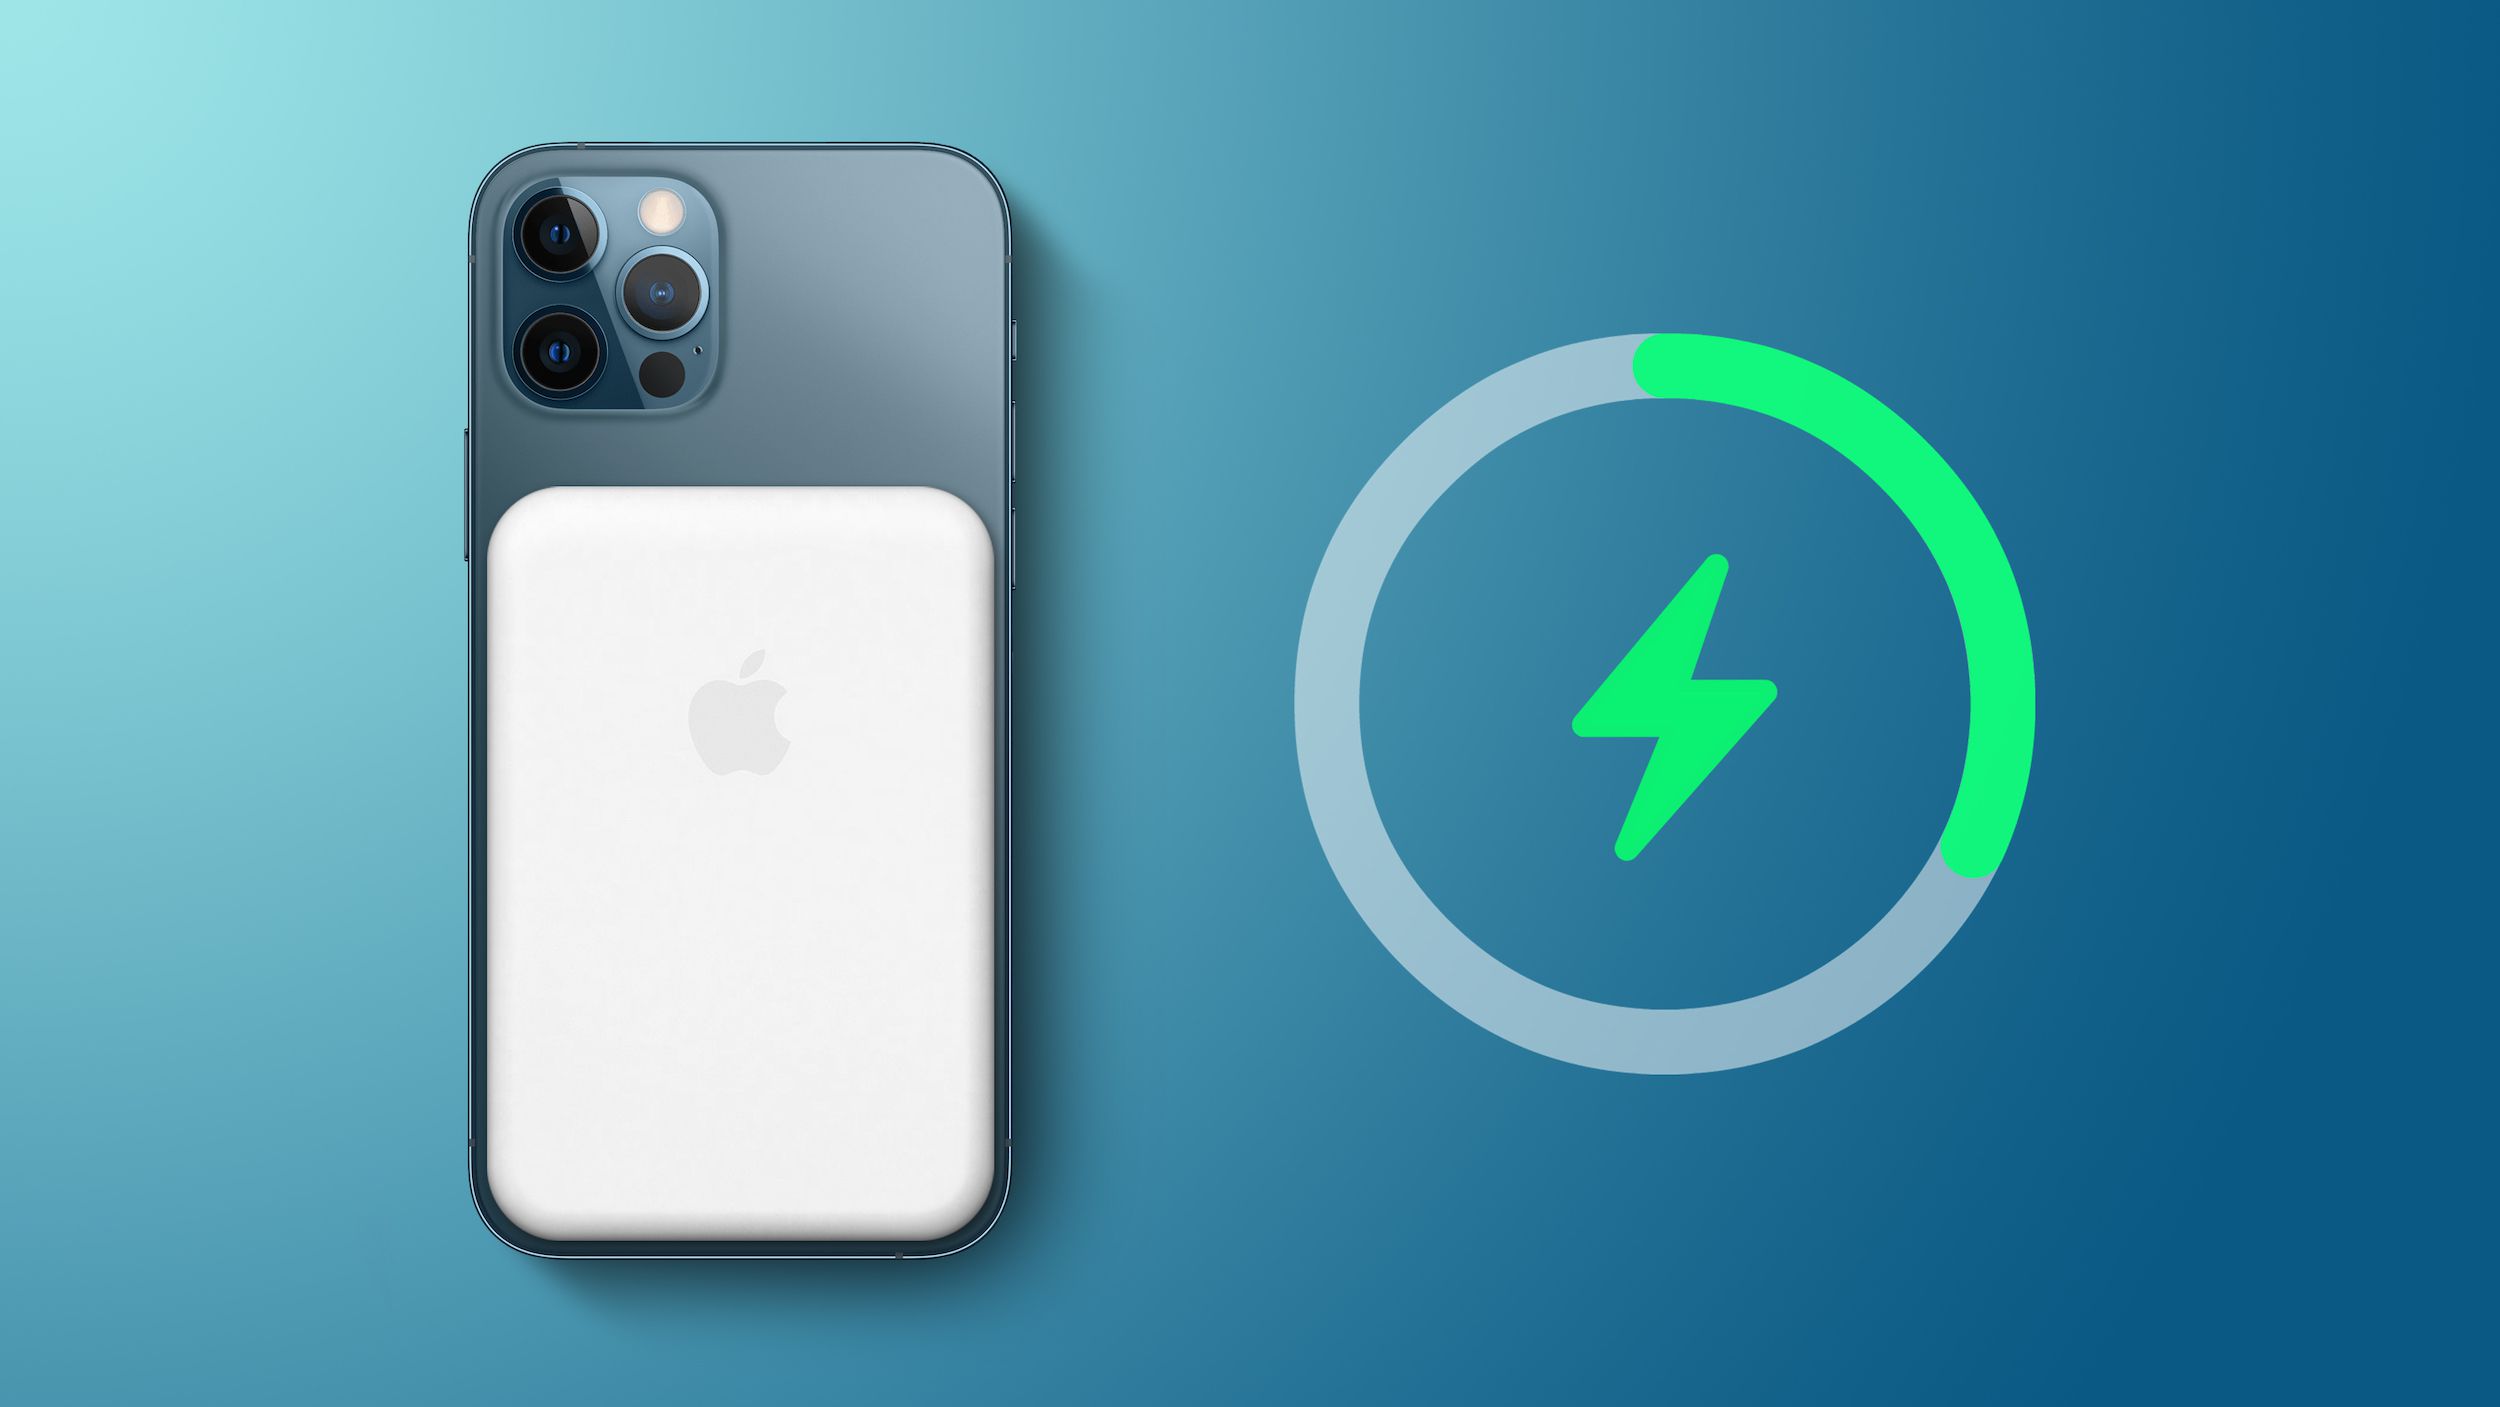 The next MagSafe battery pack for iPhone 12 from Apple: everything we know